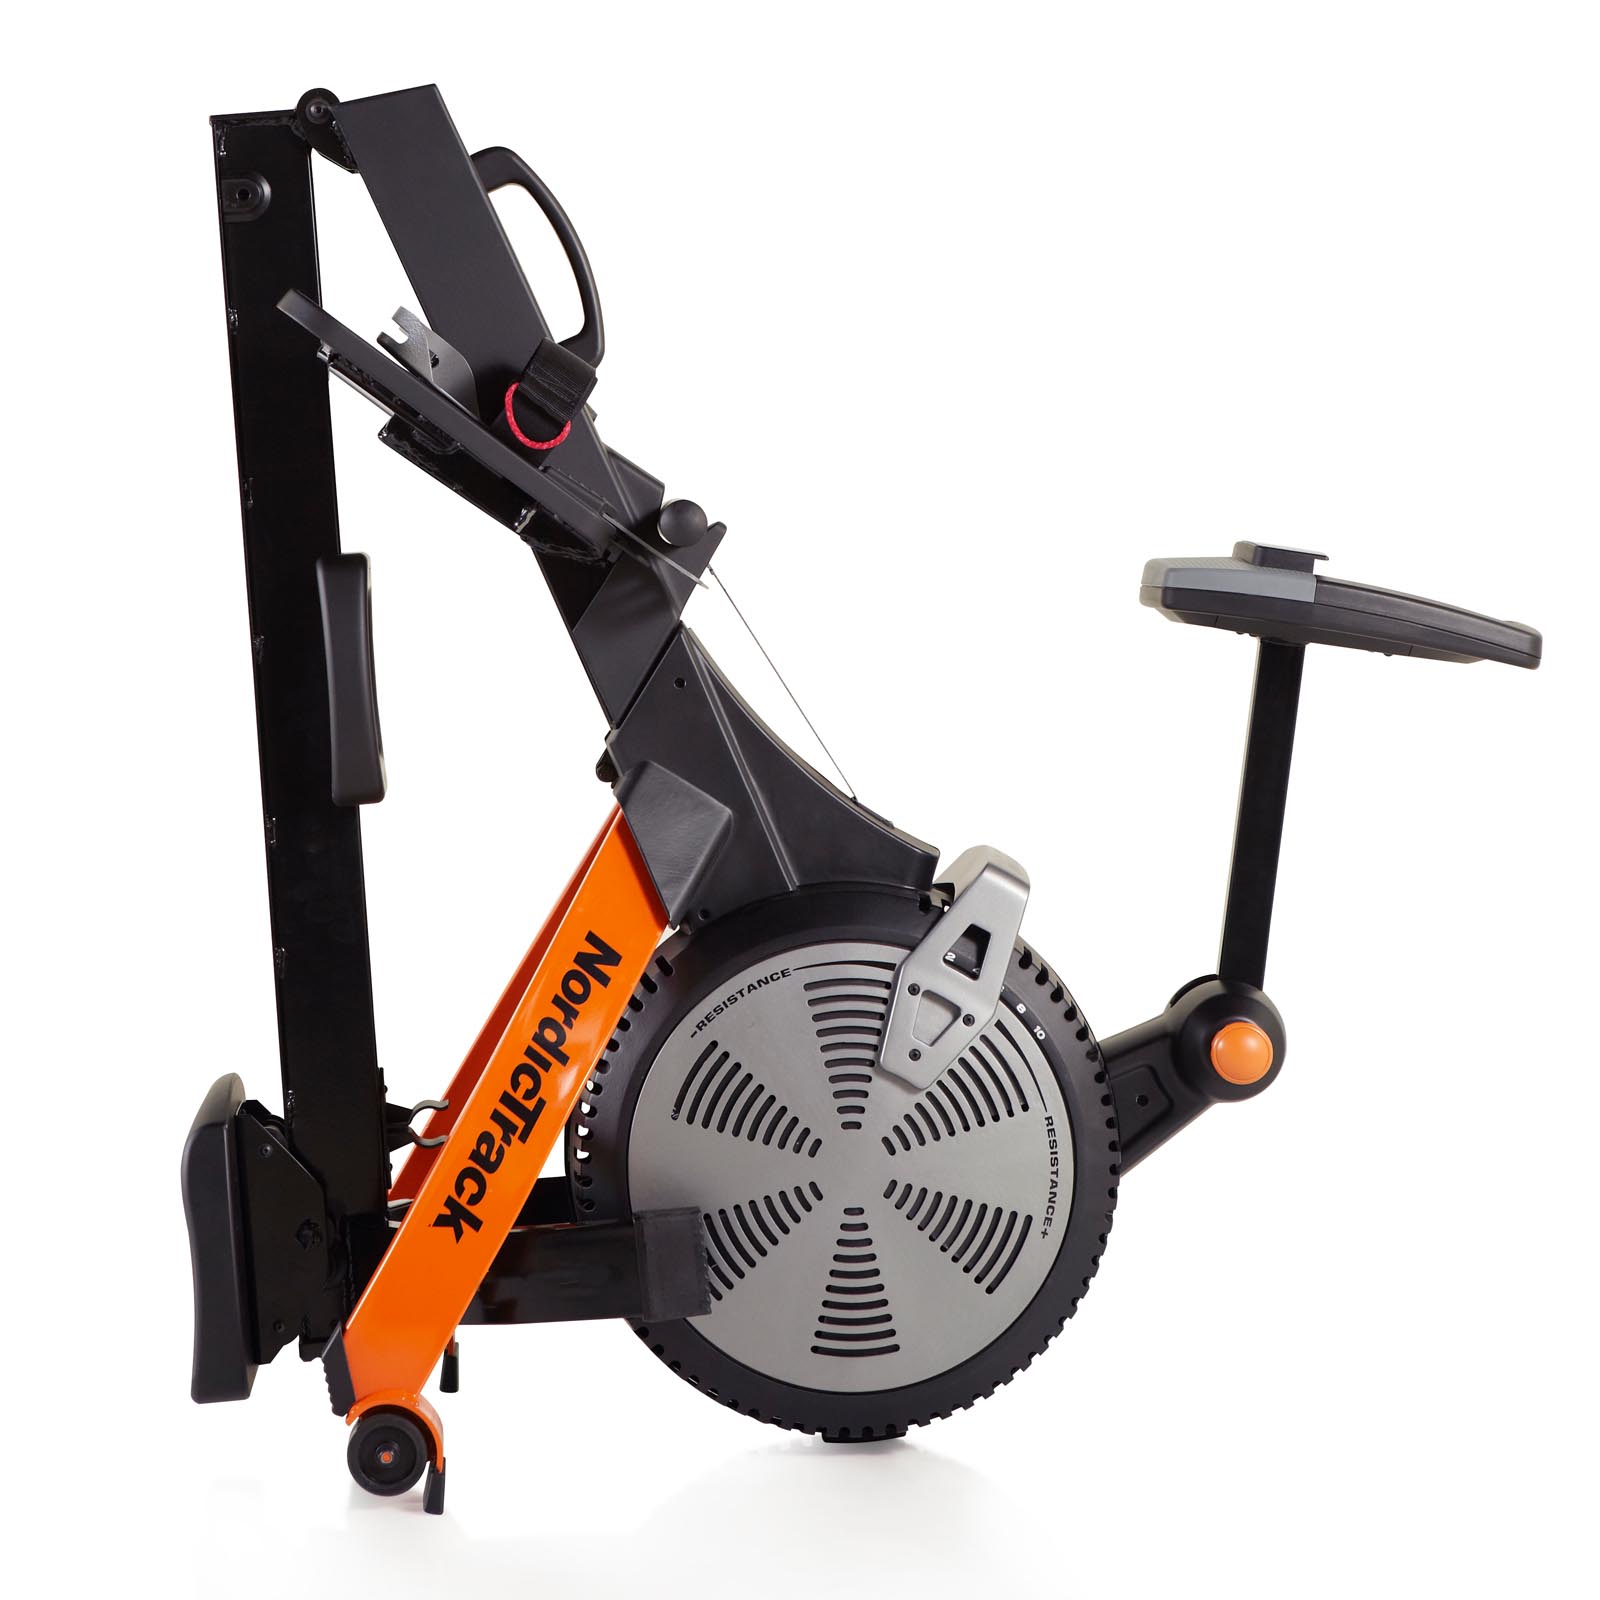 Nordictrack RX800 Rower